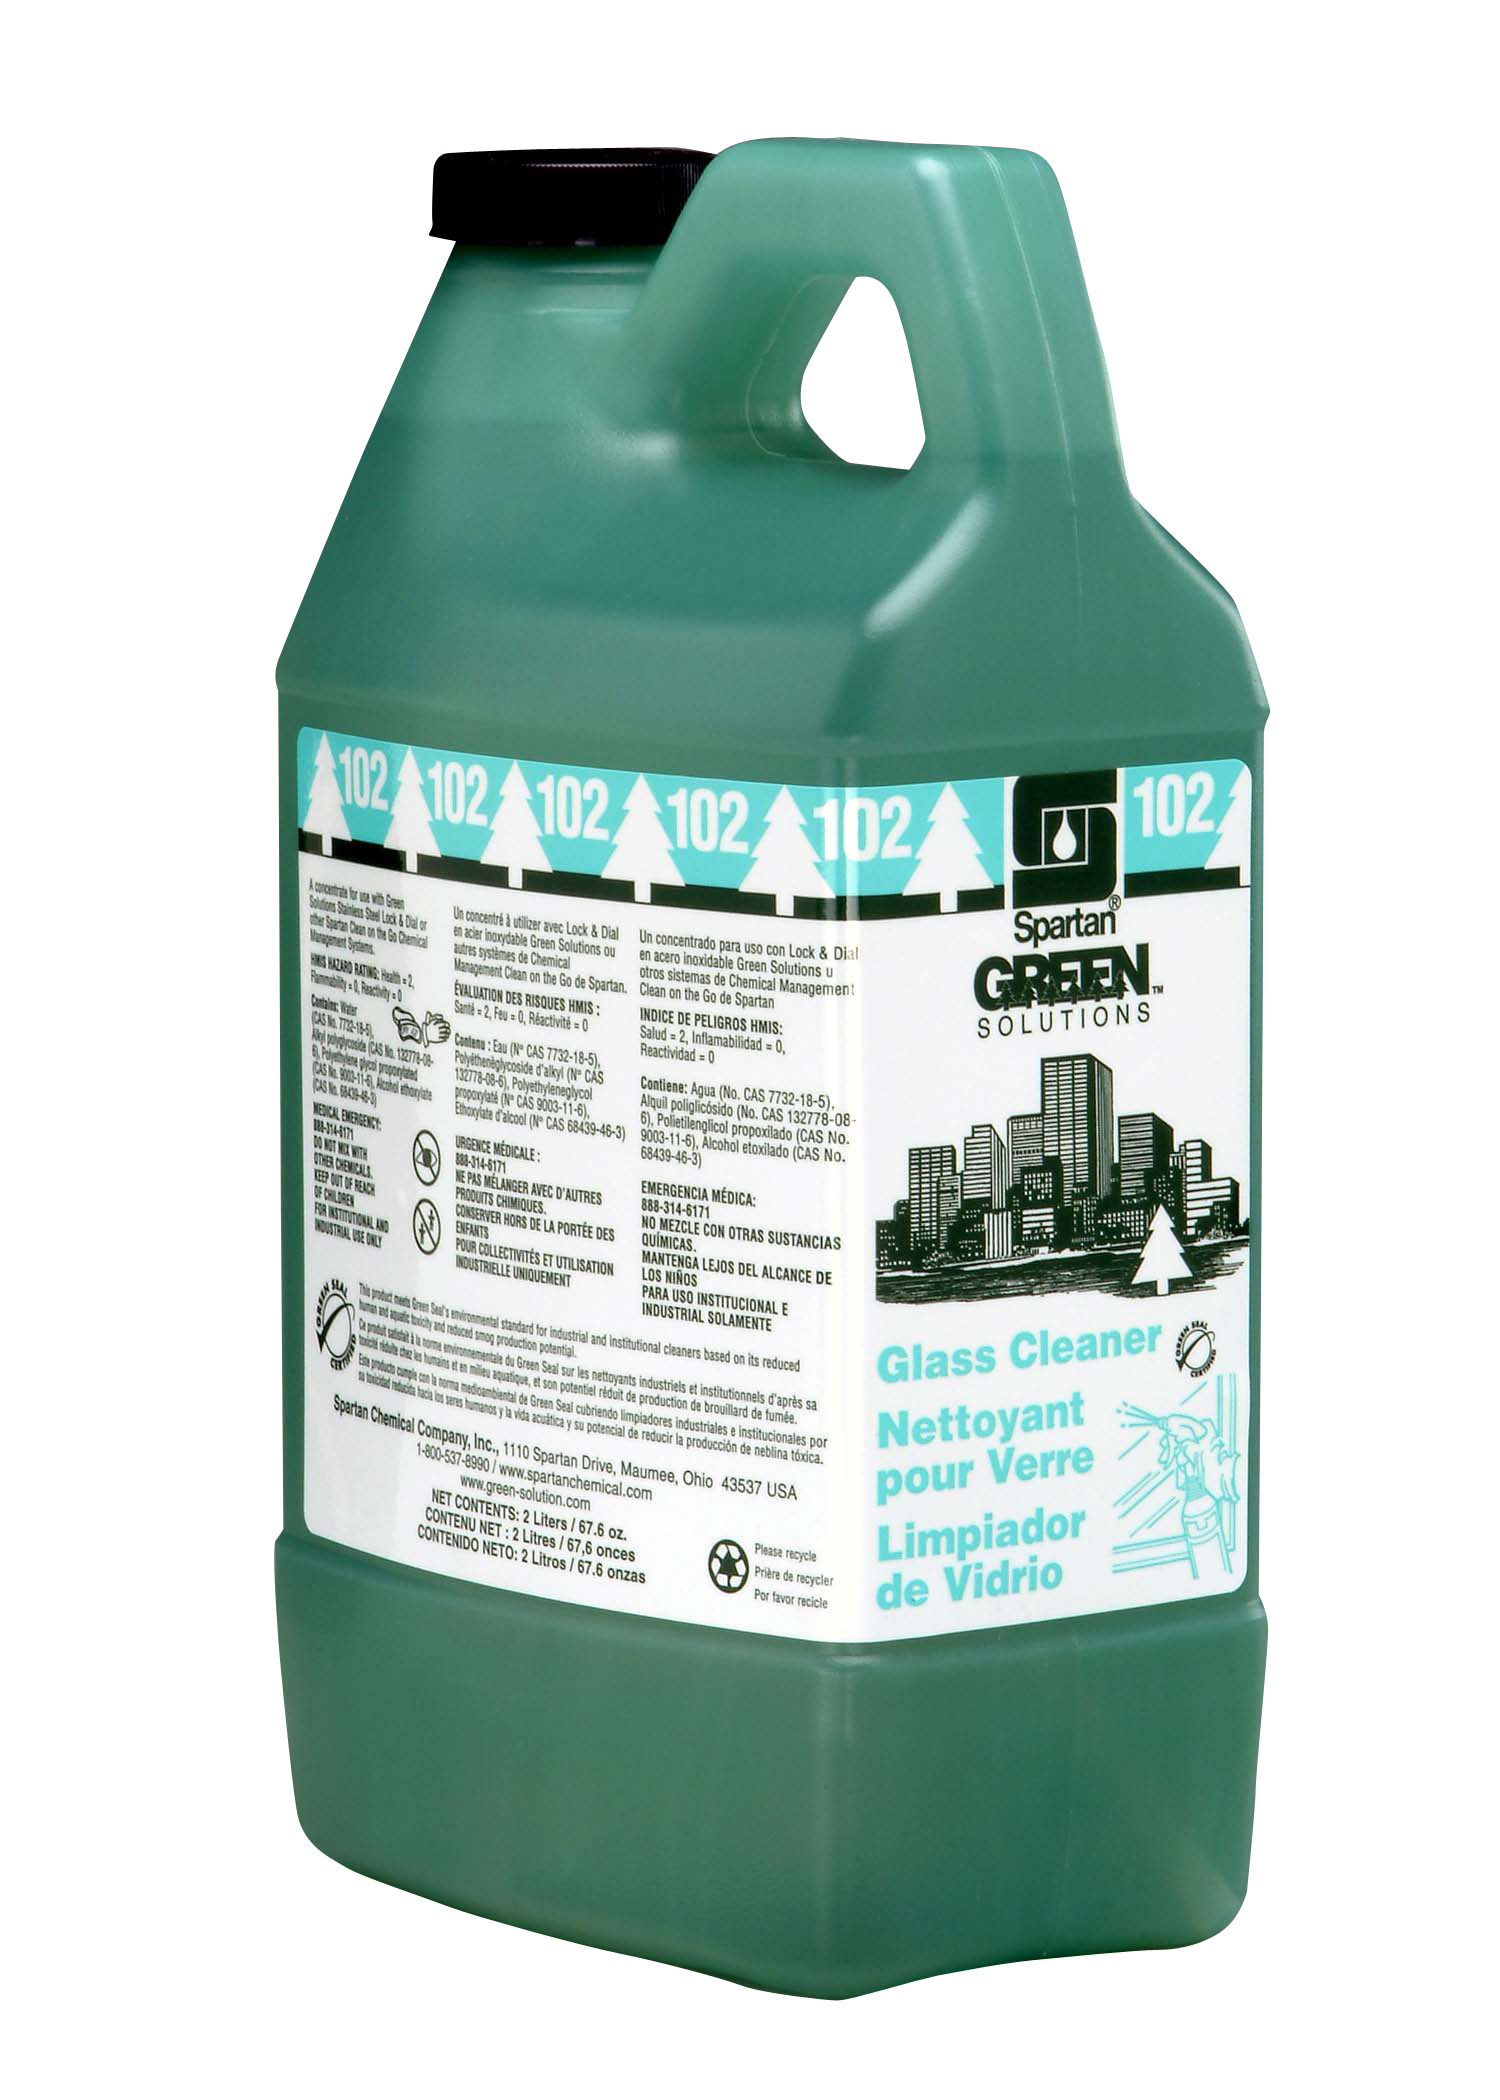 Green Solutions® Glass Cleaner 102 2 liter (4 per case)